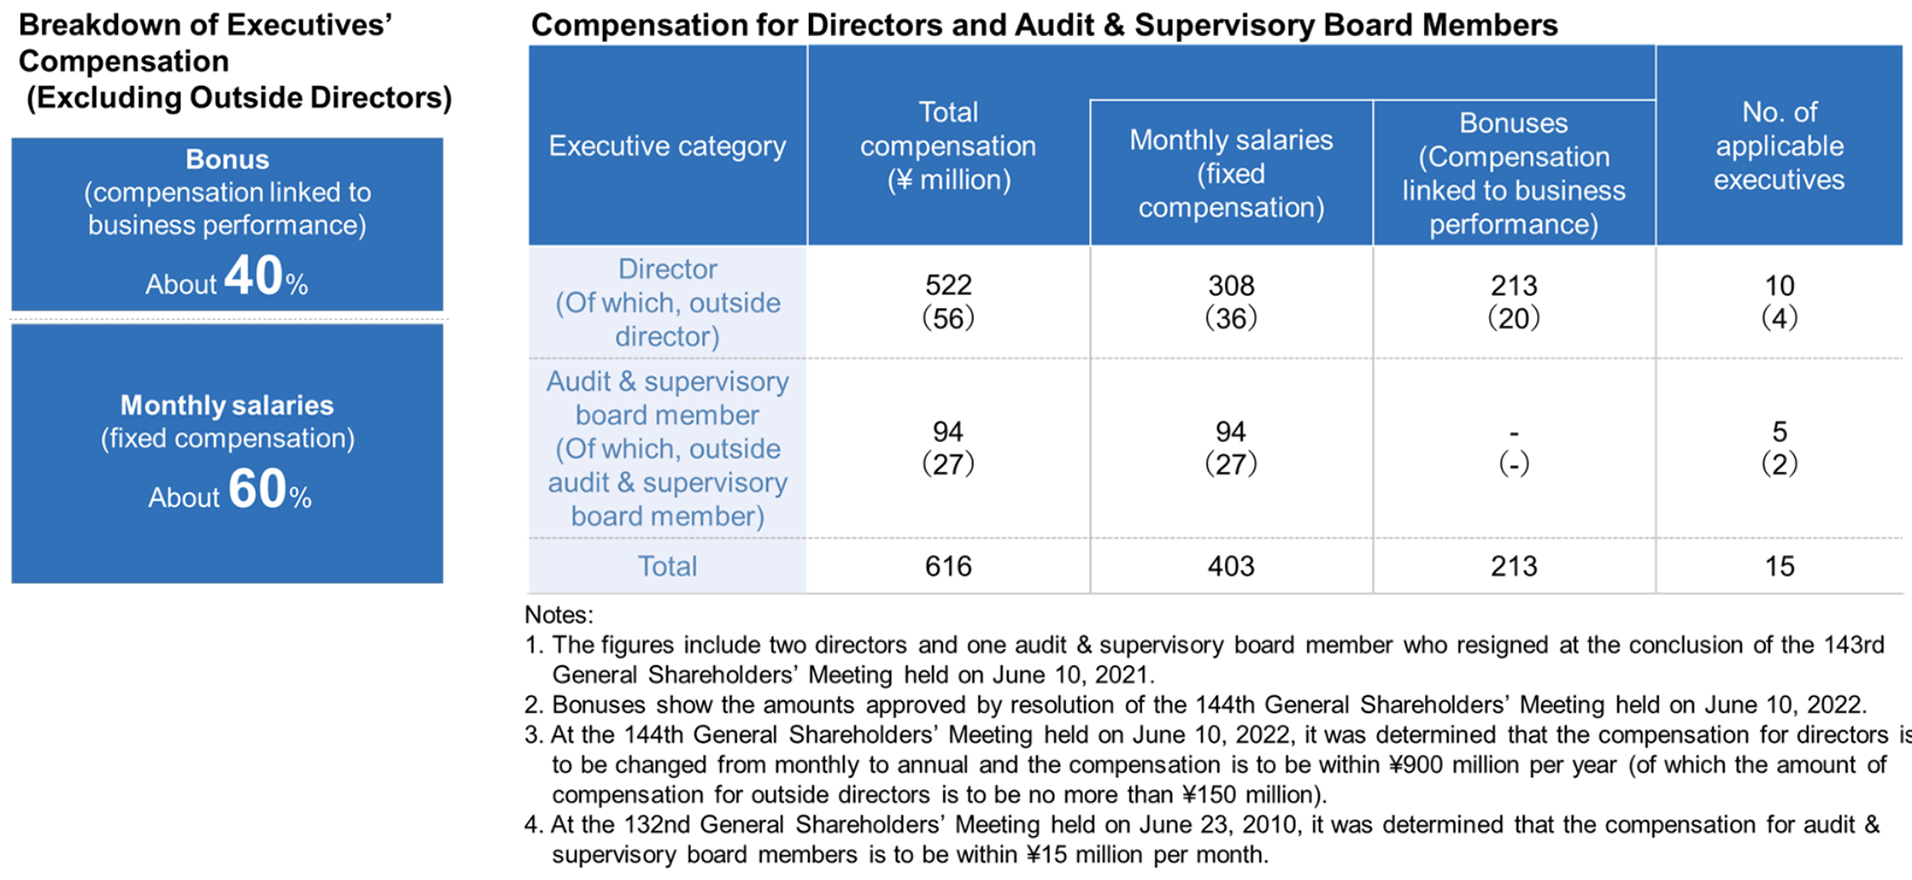 Breakdown of Executives'Compensation